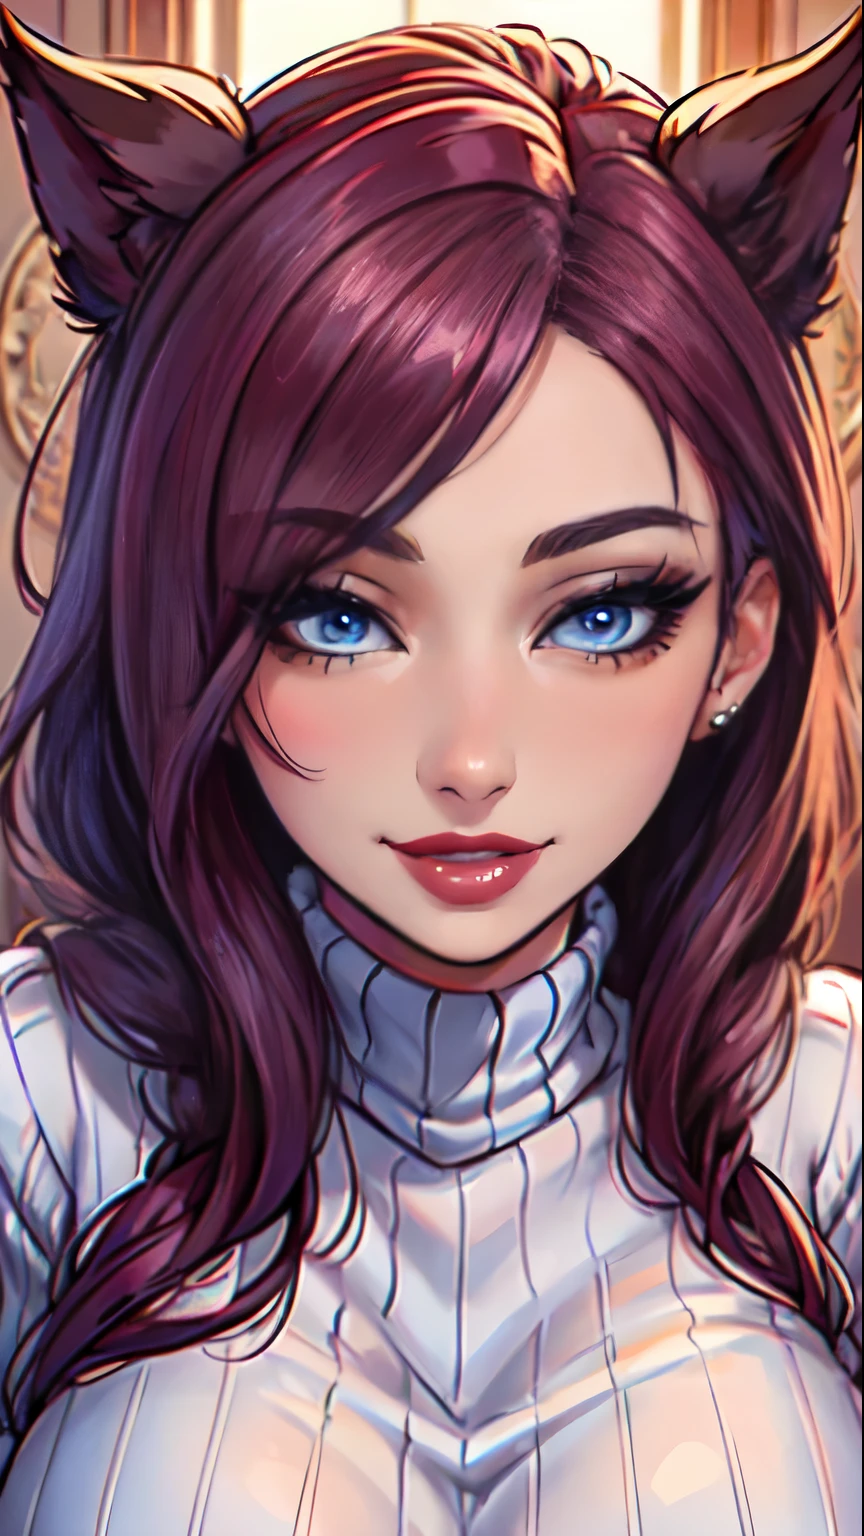 Masterpiece, raw,  beautiful art, professional artist, 8k, art style by sciamano240, very detailed face, very detailed hair, (1girl), caressing each other, perfectly drawn body, beautiful face, long hair , very detailed blue eyes , rosey cheeks, intricate details in eyes, sultry smile, looking directly at viewer , lusty expression, lipstick, very close up on face, wearing tight sweater, home setting, 